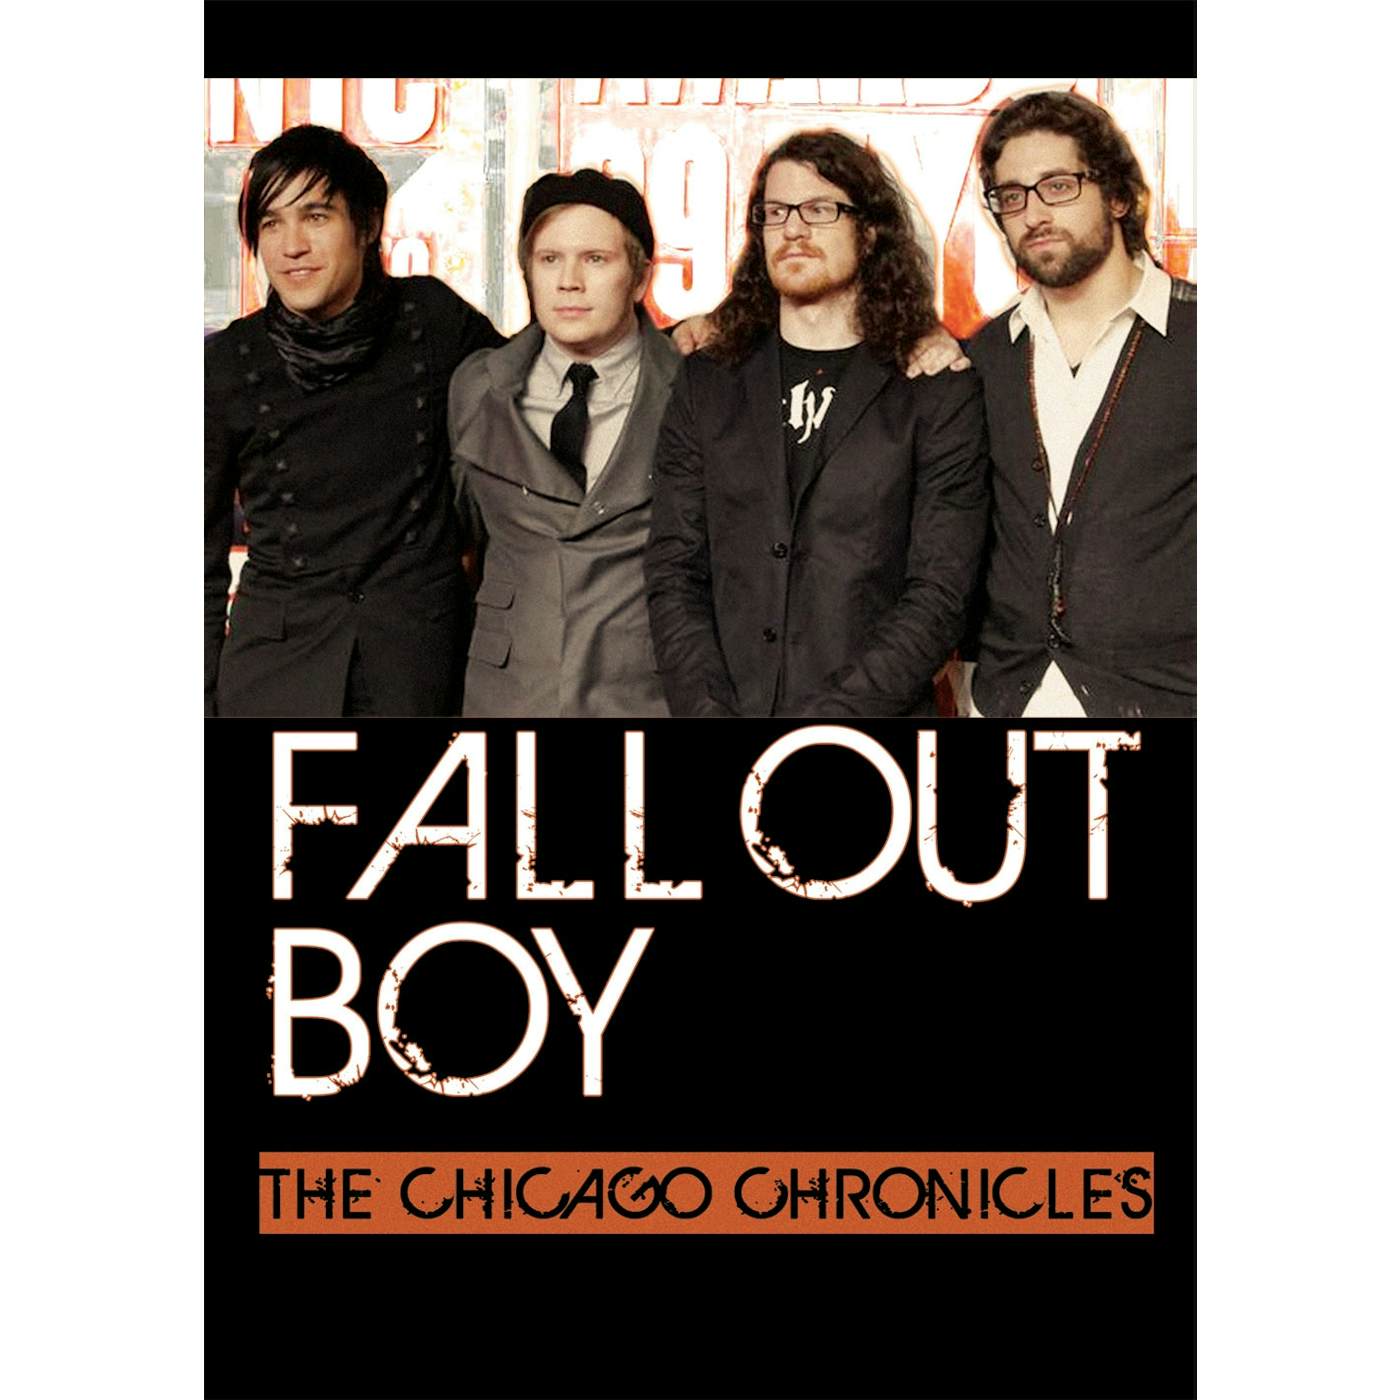 Fall Out Boy DVD - The Chicago Chronicles